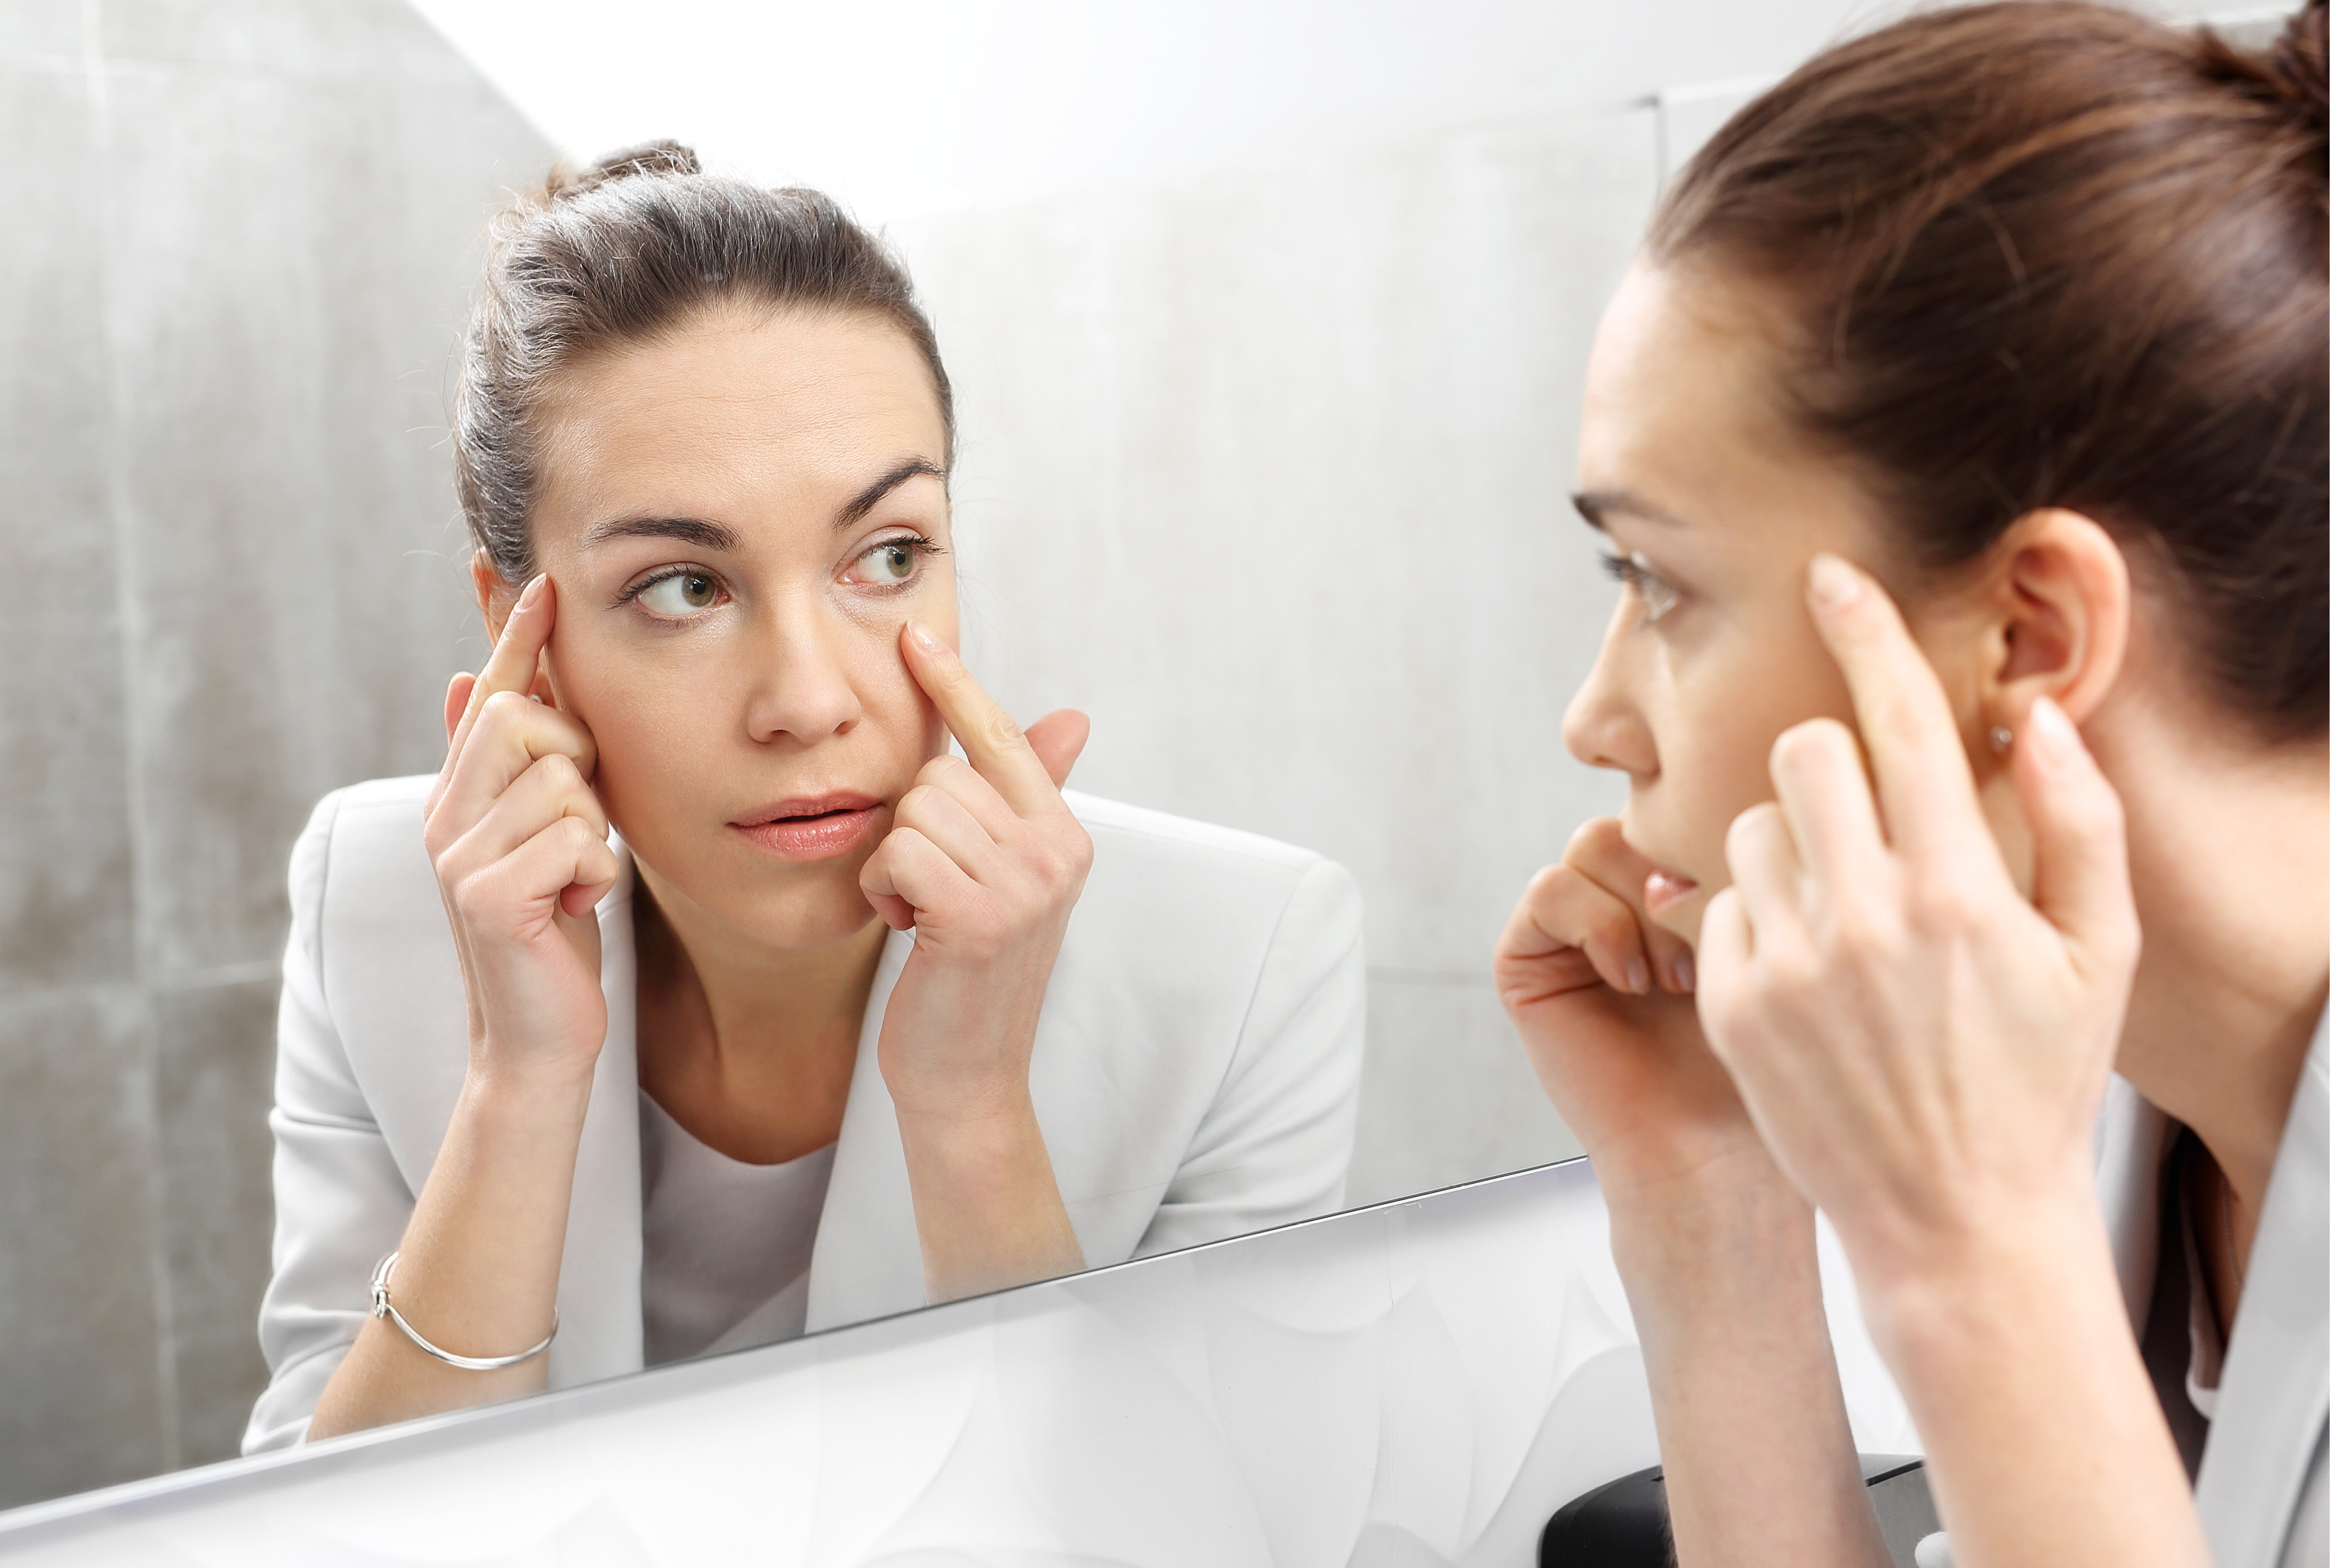 Can You Prevent Certain Signs of Aging?